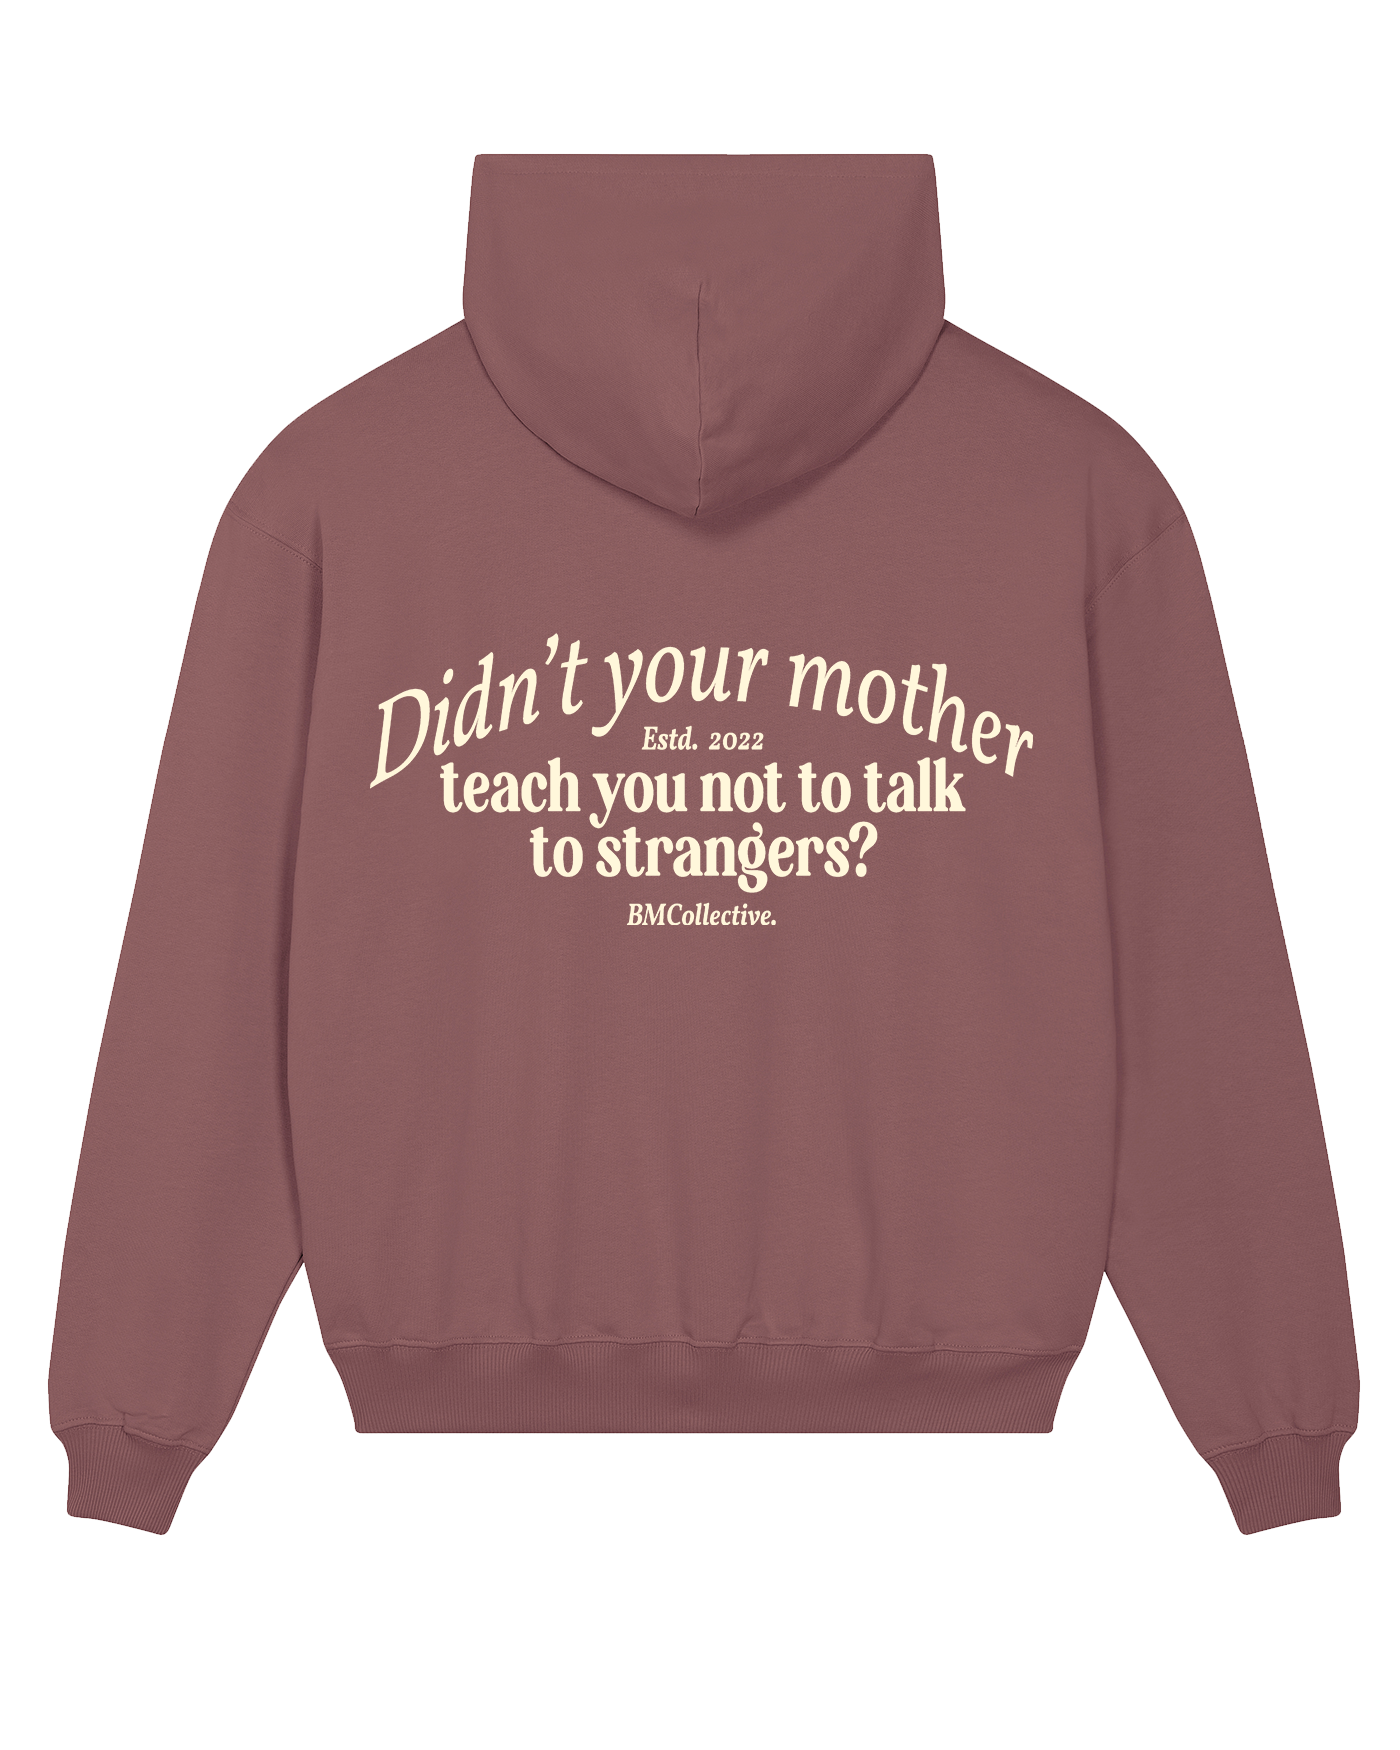 Don't talk to strangers Hoodie